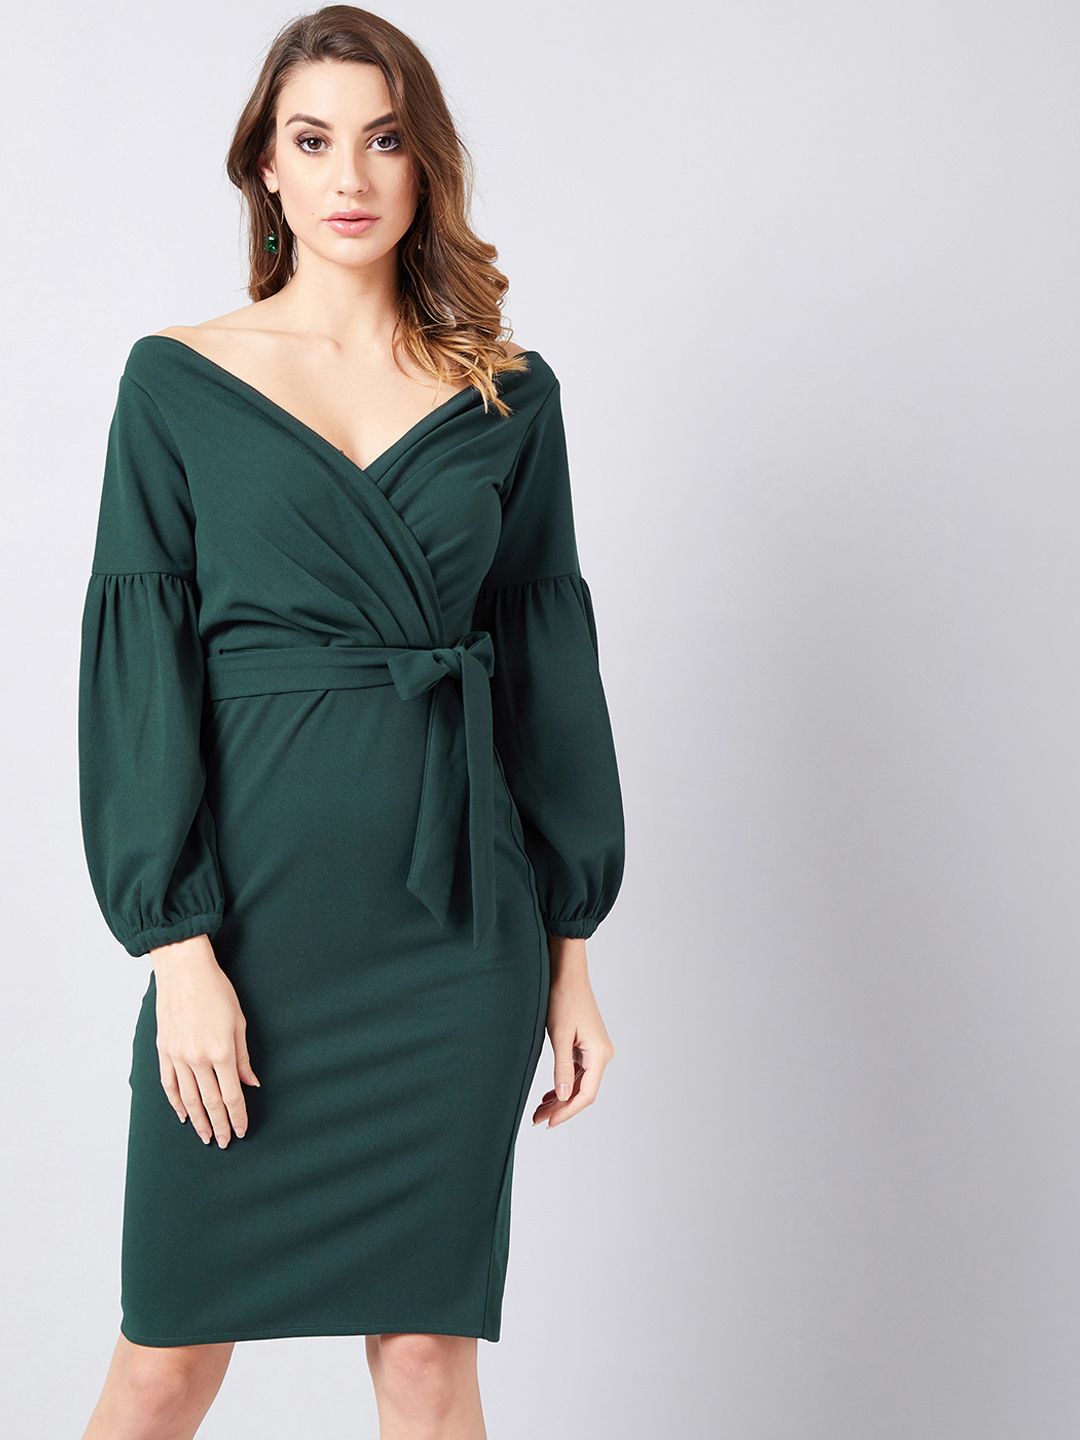 Athena Green Wrap Dress With Puff Sleeves Price in India